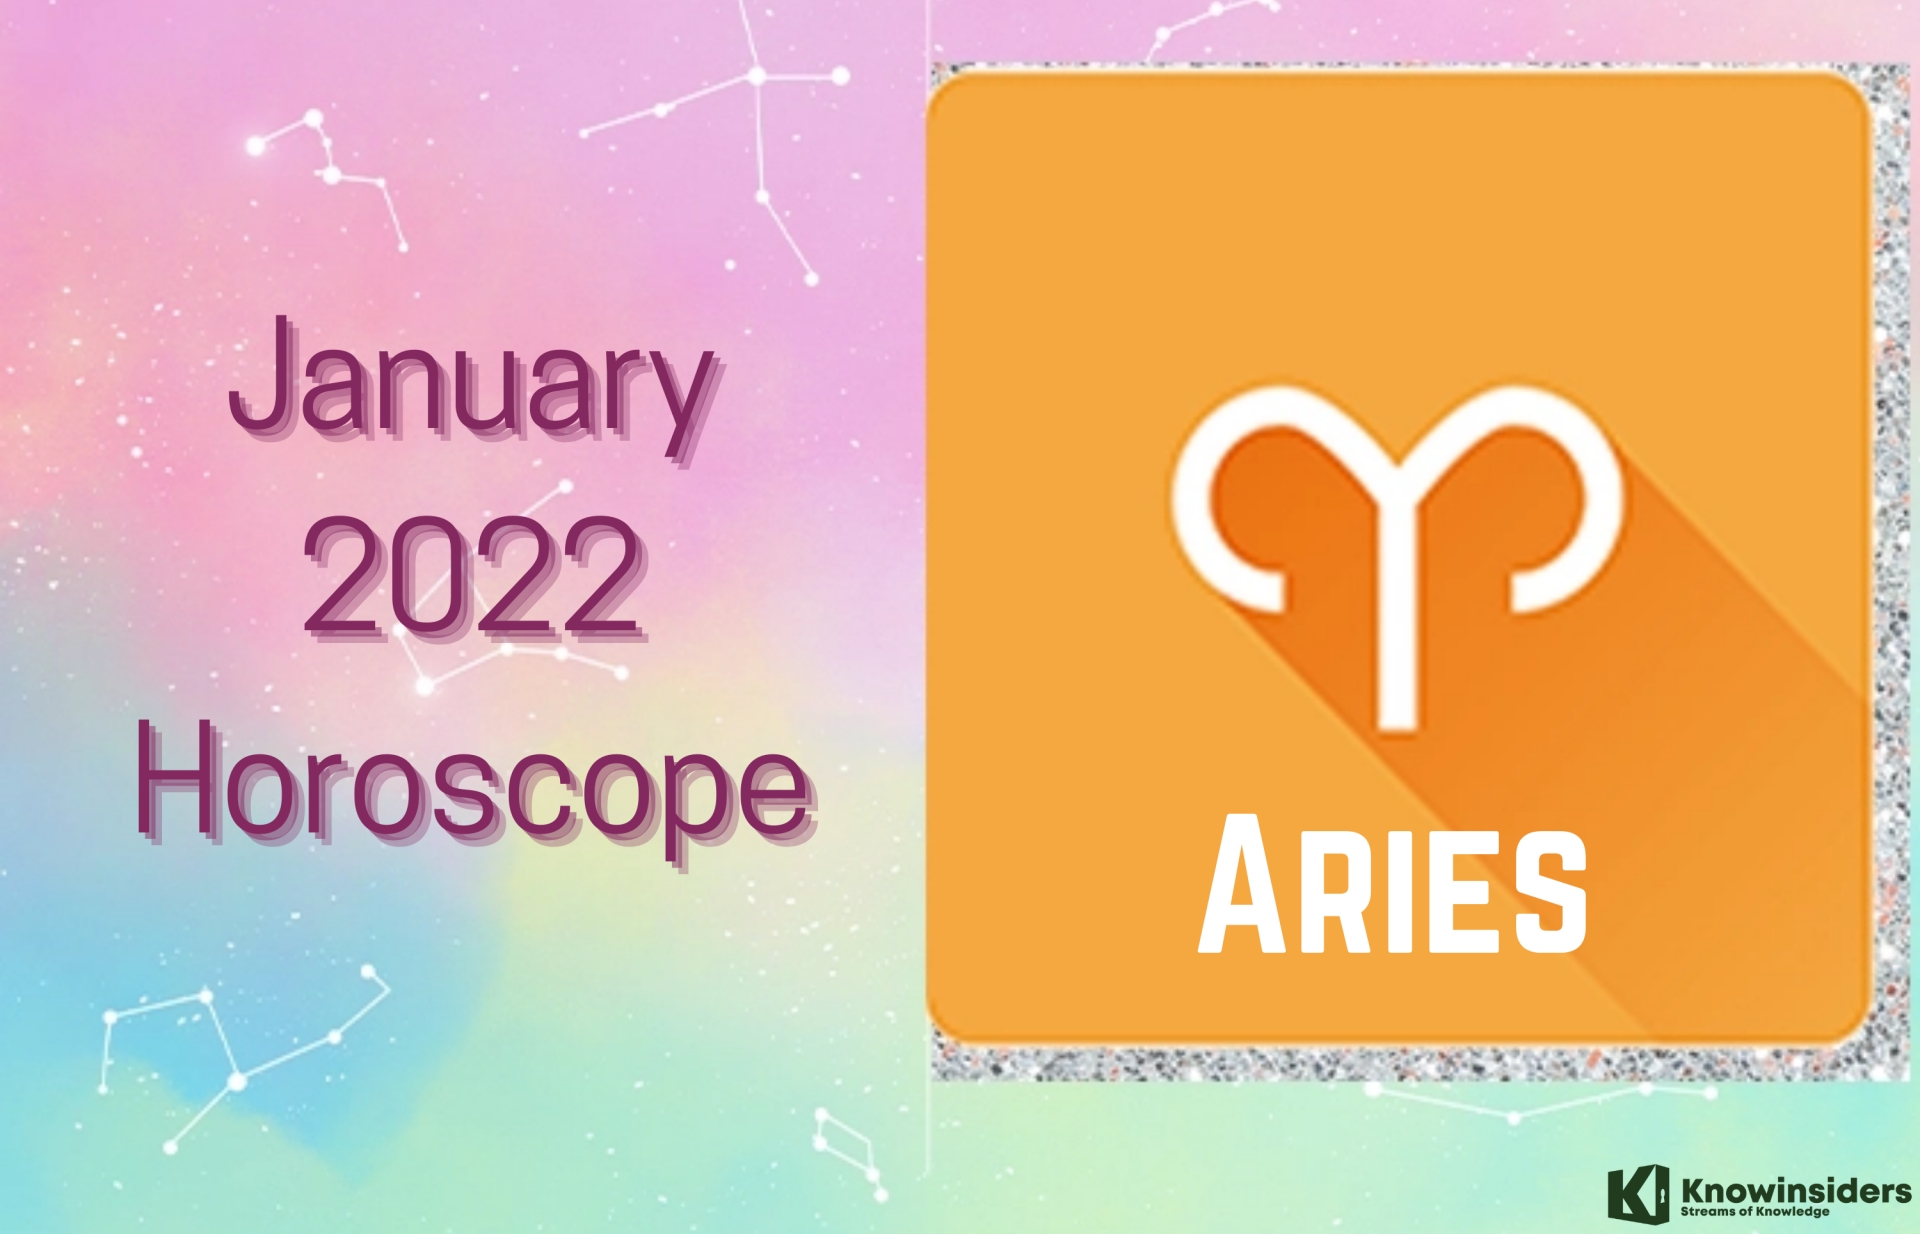 ARIES January 2022 Horoscope: Monthly Prediction for Love, Career, Money and Health